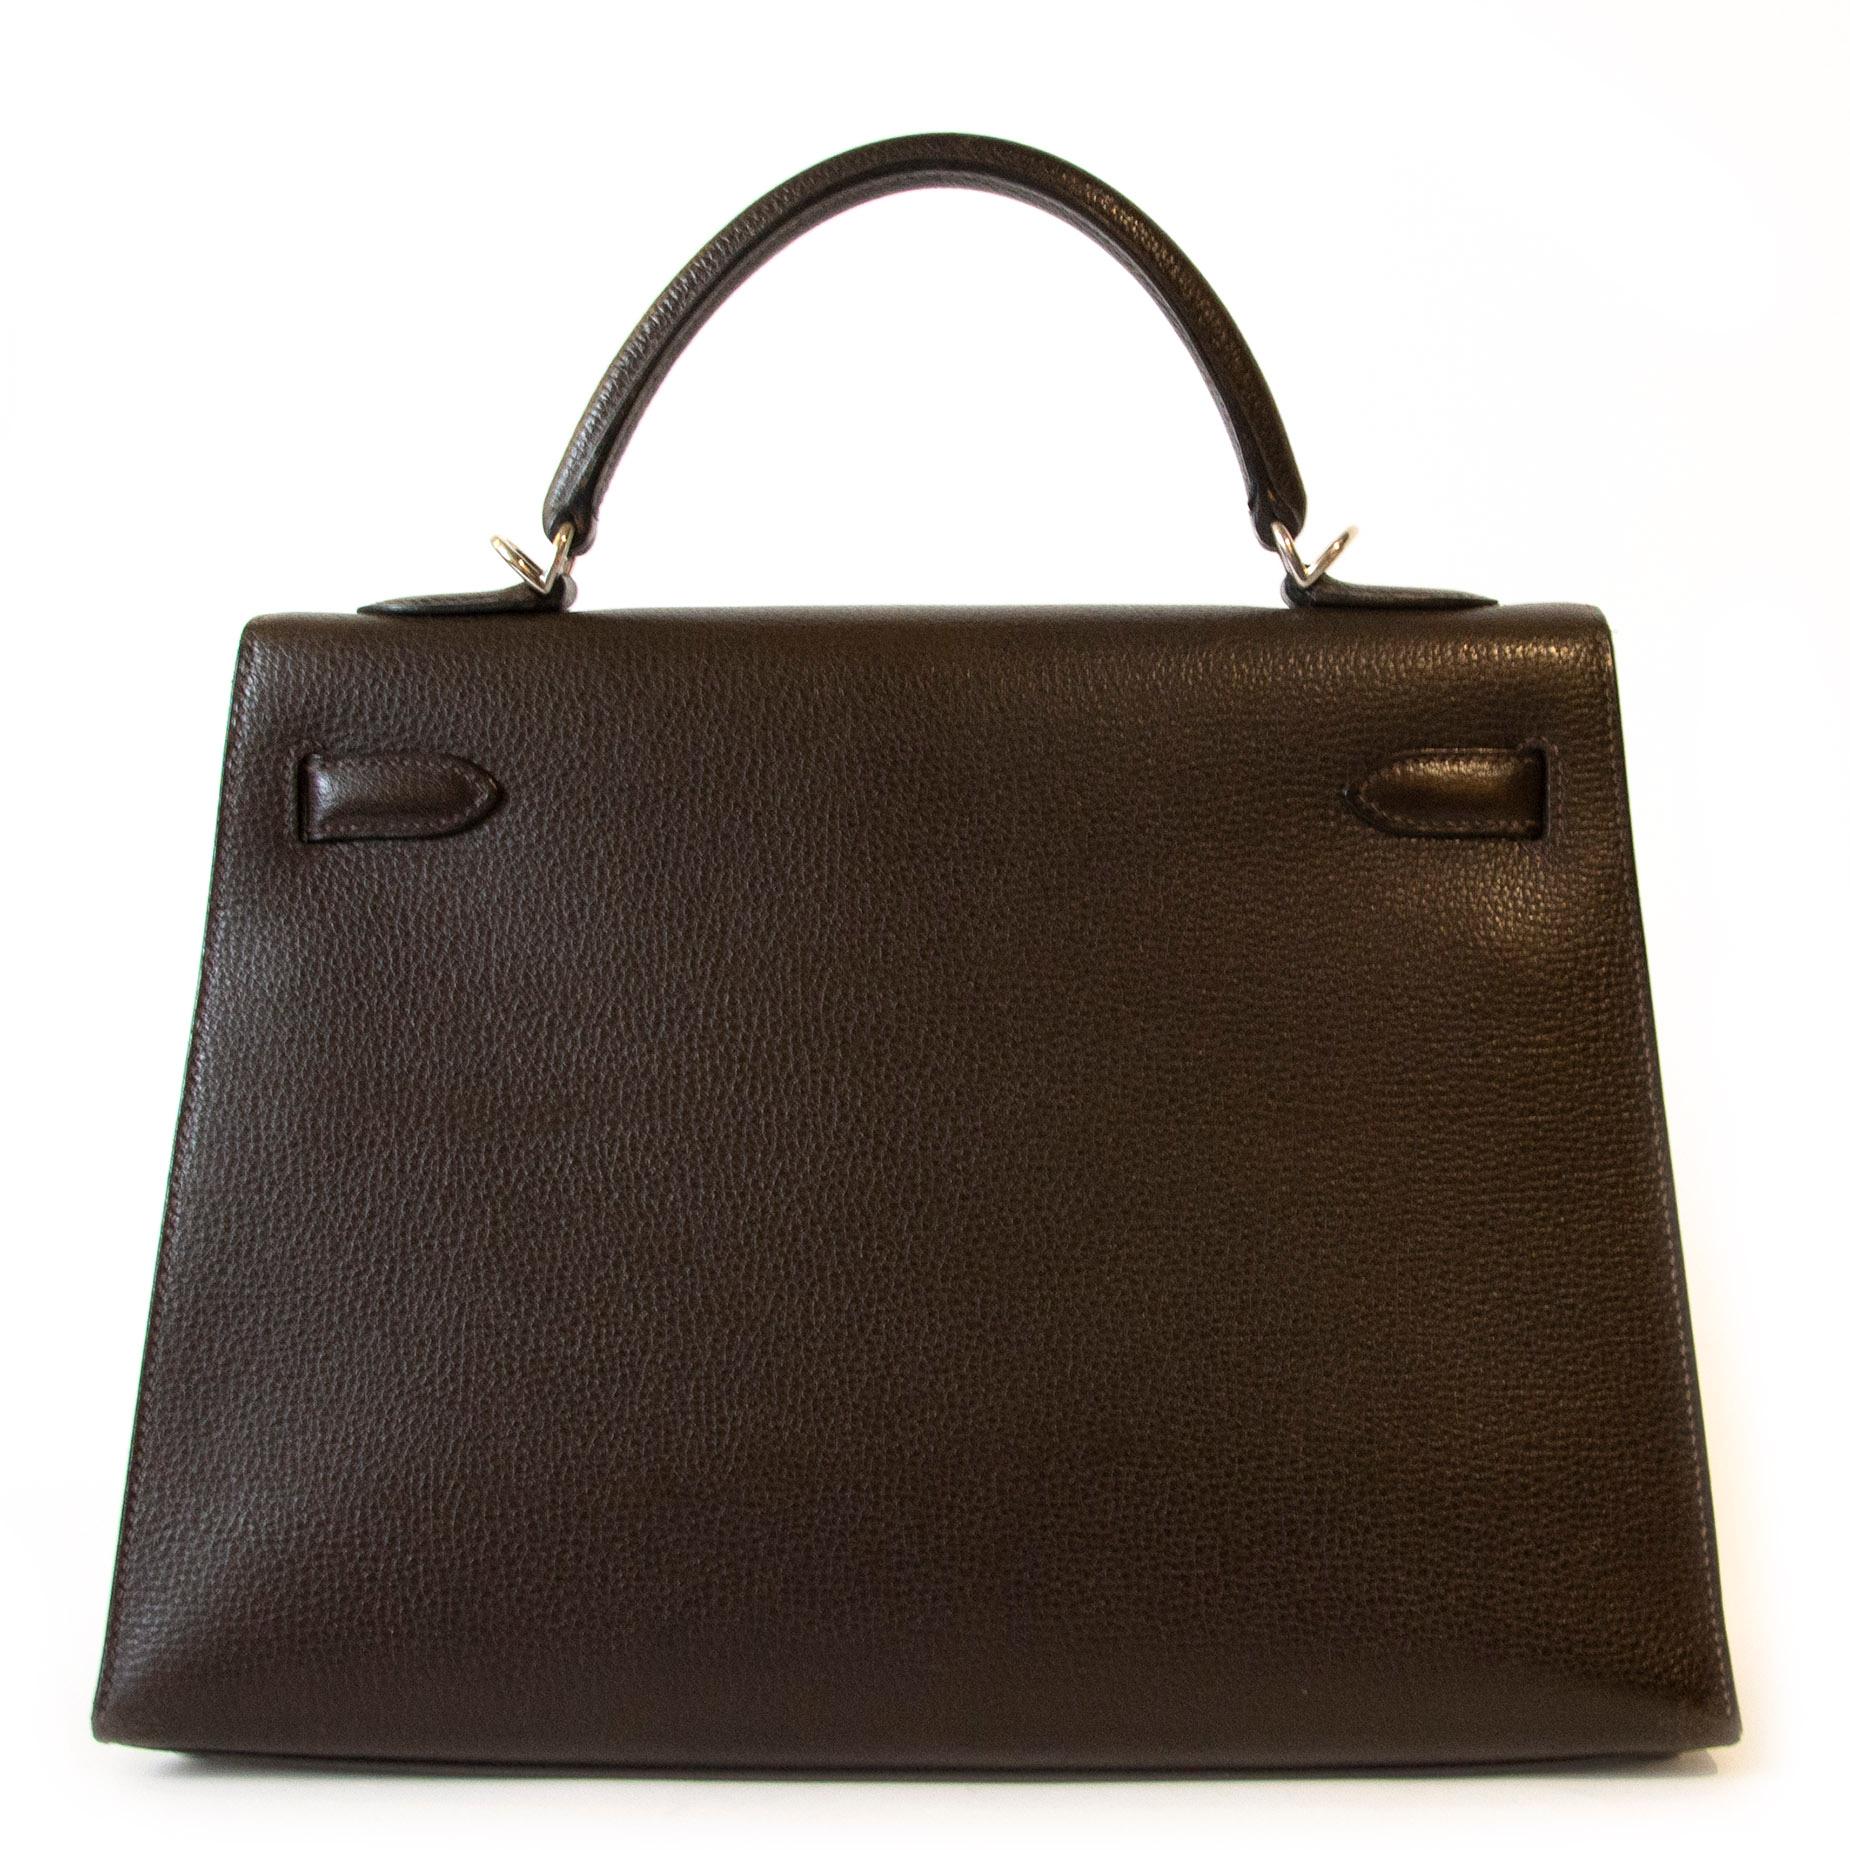 Hermès Kelly 32 Brown Vache Liègee PHW. This wonderful Hermès Kelly comes in a size 32 and is crafted out of extremely sturdy and durable Vache Liègee leather. This Vache Liegee is the thickest and most durable of Hermès’ leathers released! This